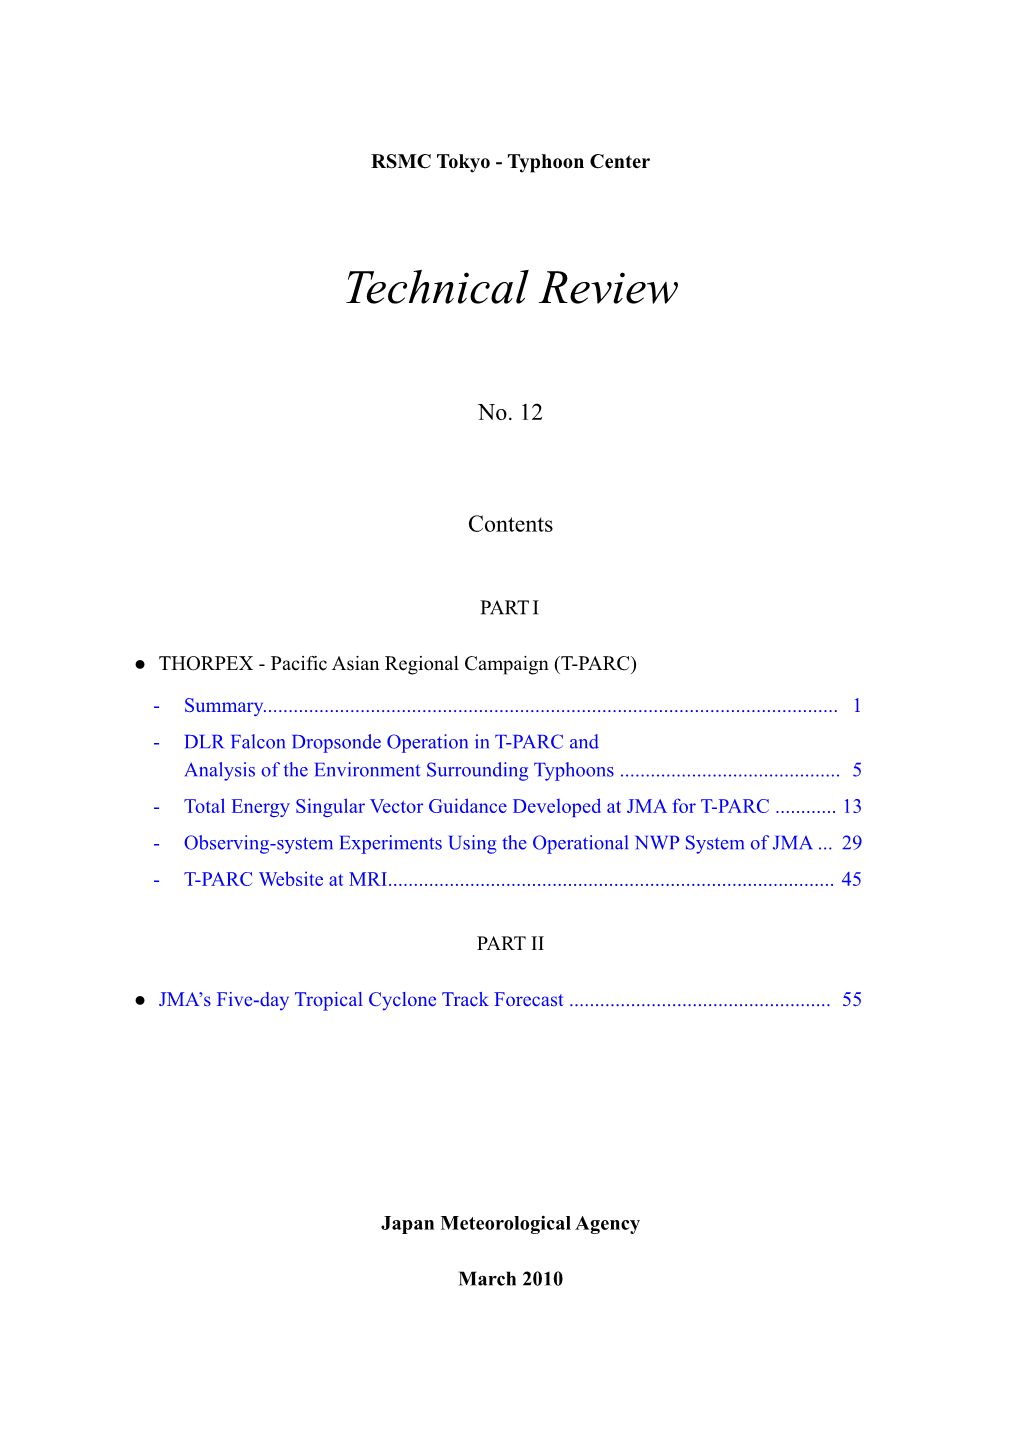 Technical Review